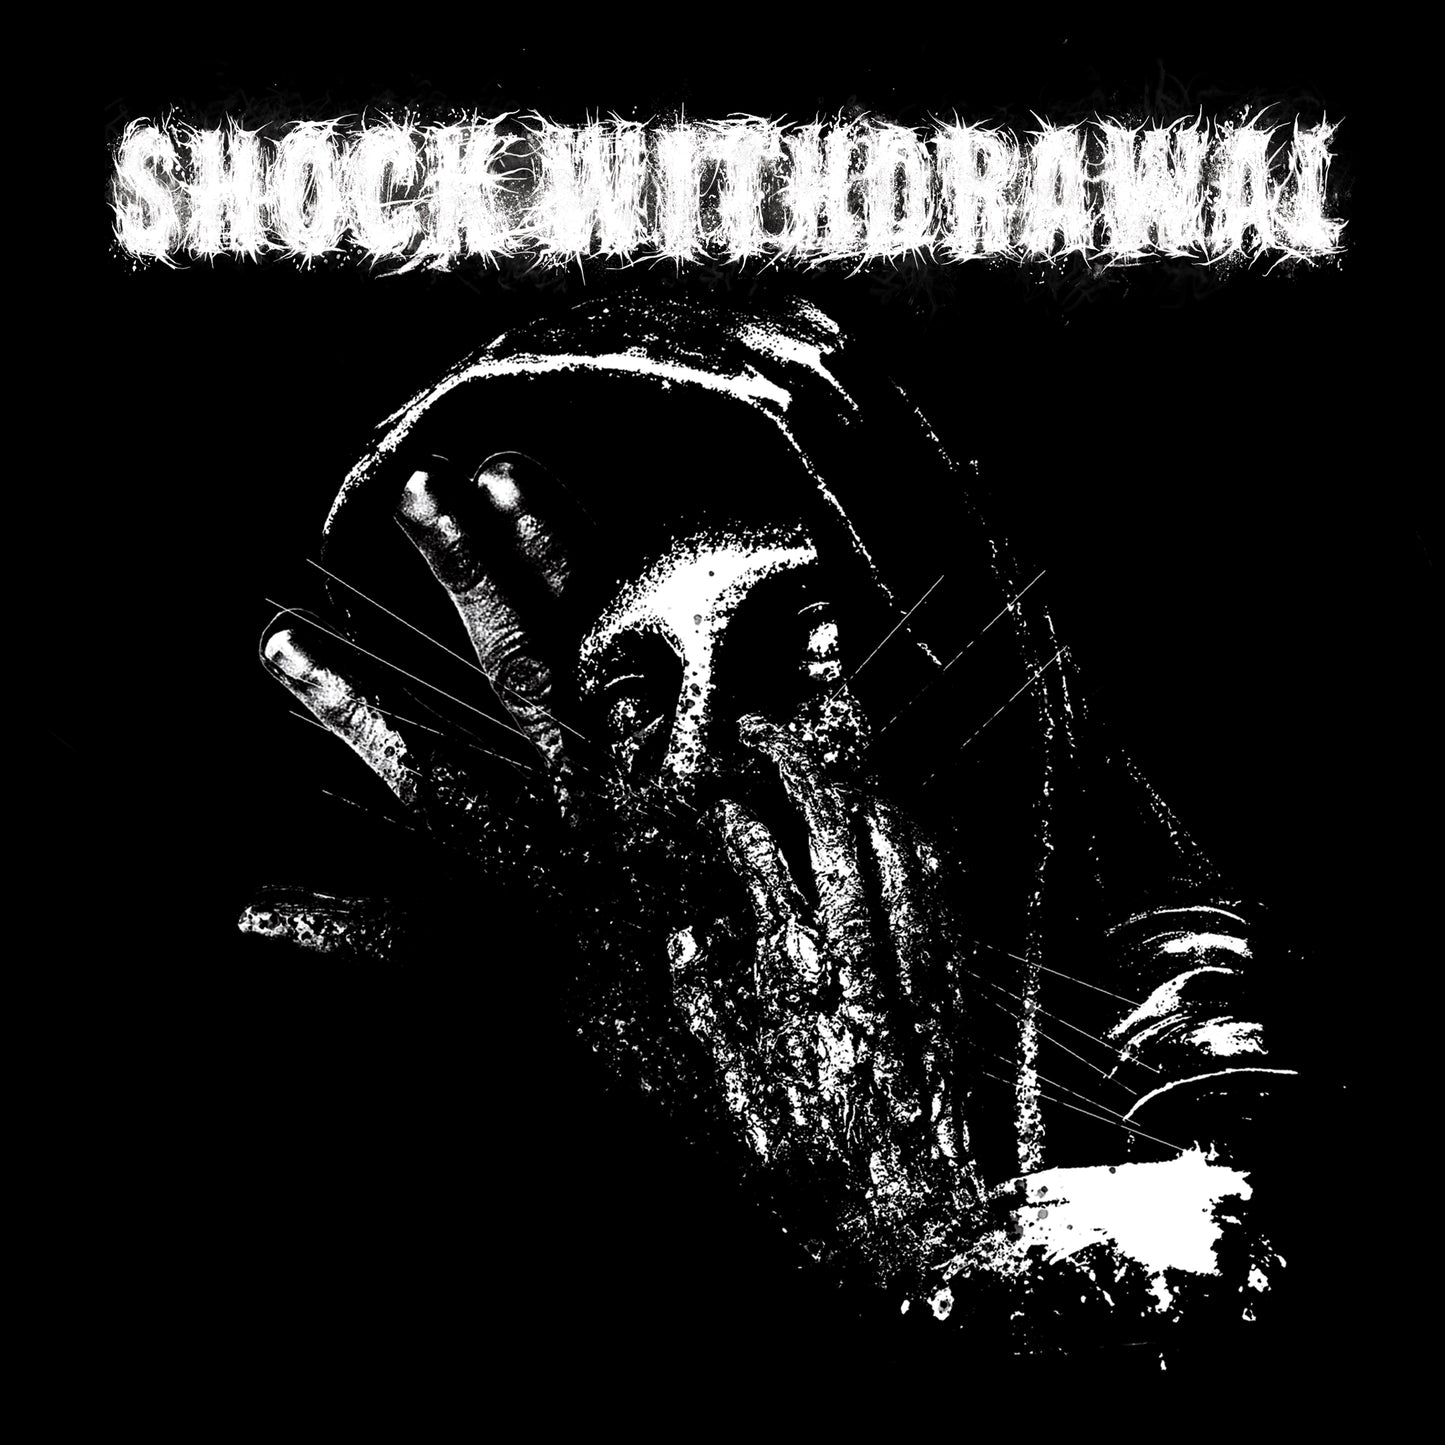 SHOCK WITHDRAWAL - Shock Withdrawal - Cassette Tape